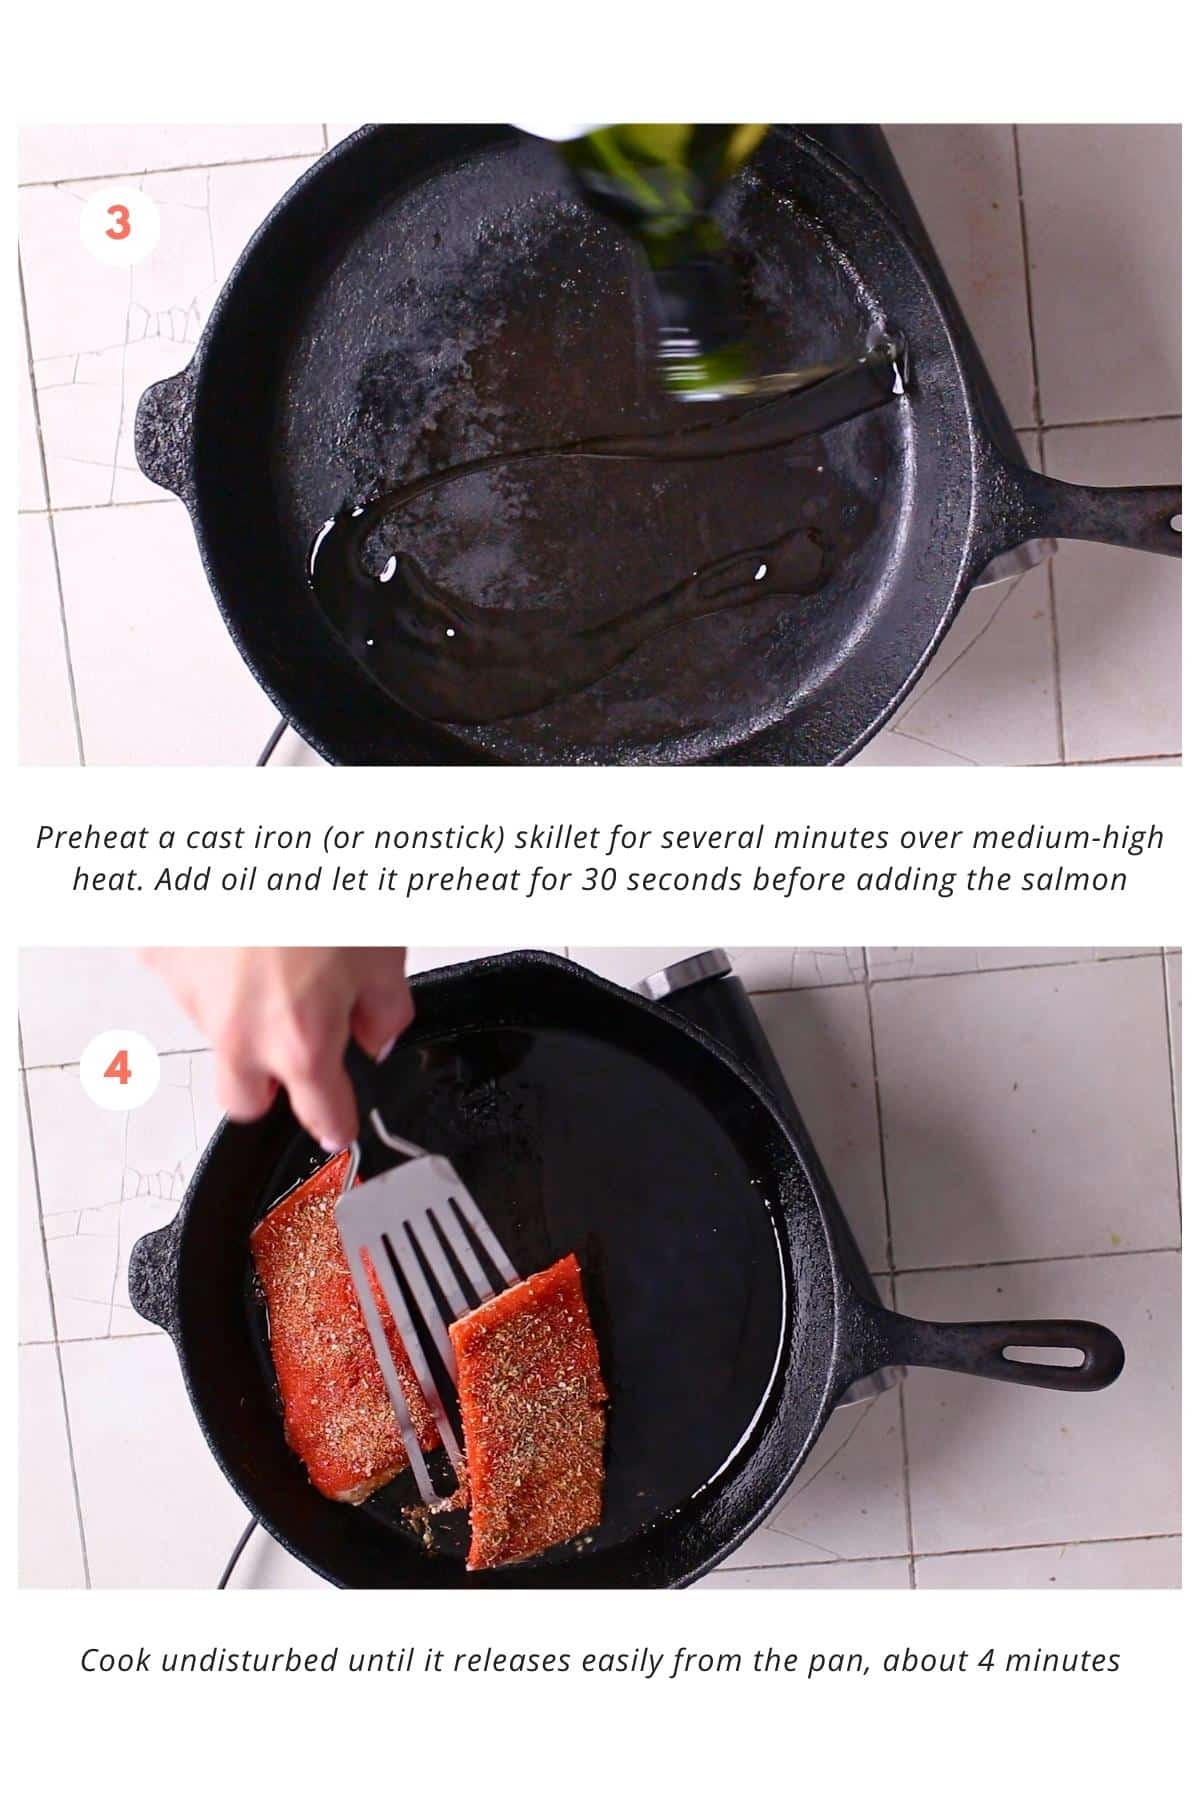 In the cast iron skillet, the salmon is cooked undisturbed until it releases easily from the pan over medium-high heat with preheated oil for about 4 minutes.